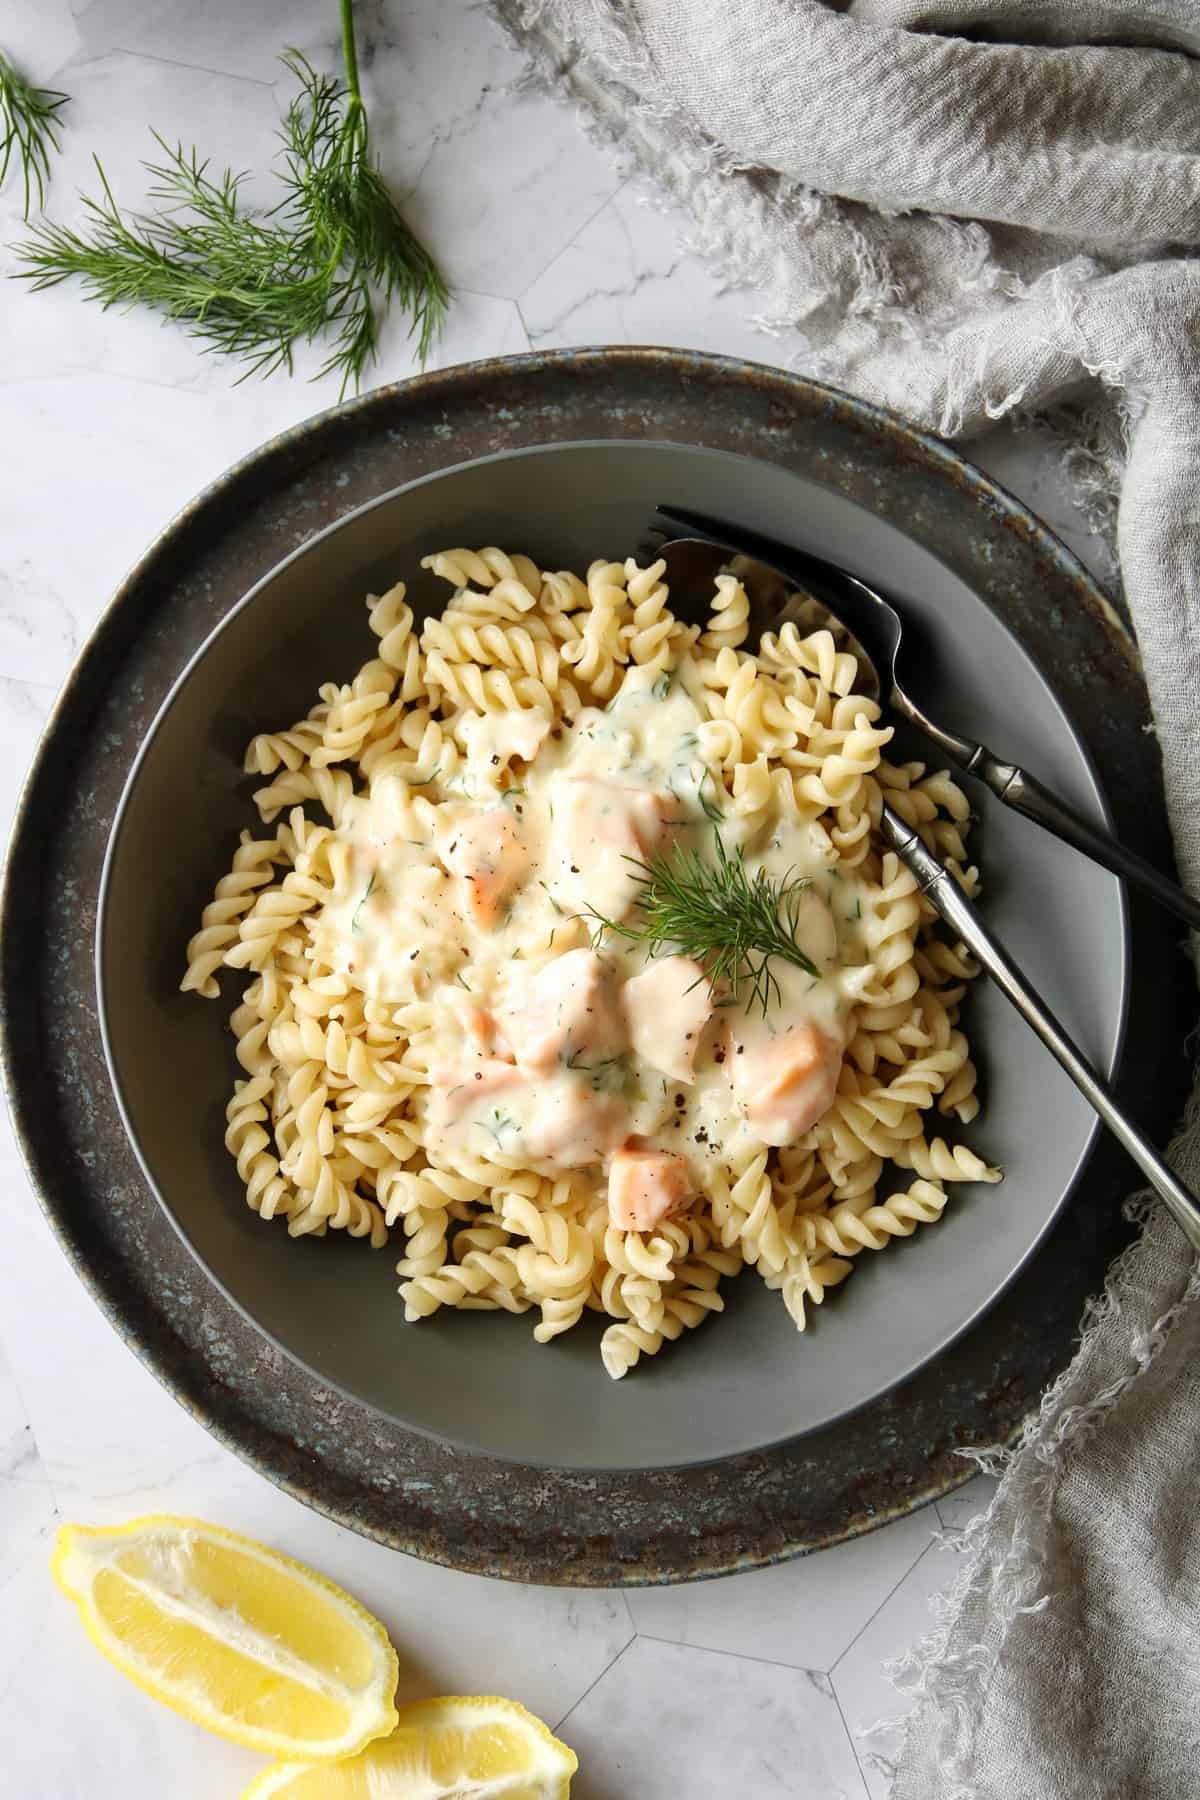 A plate of pasta with salmon and cream sauce.